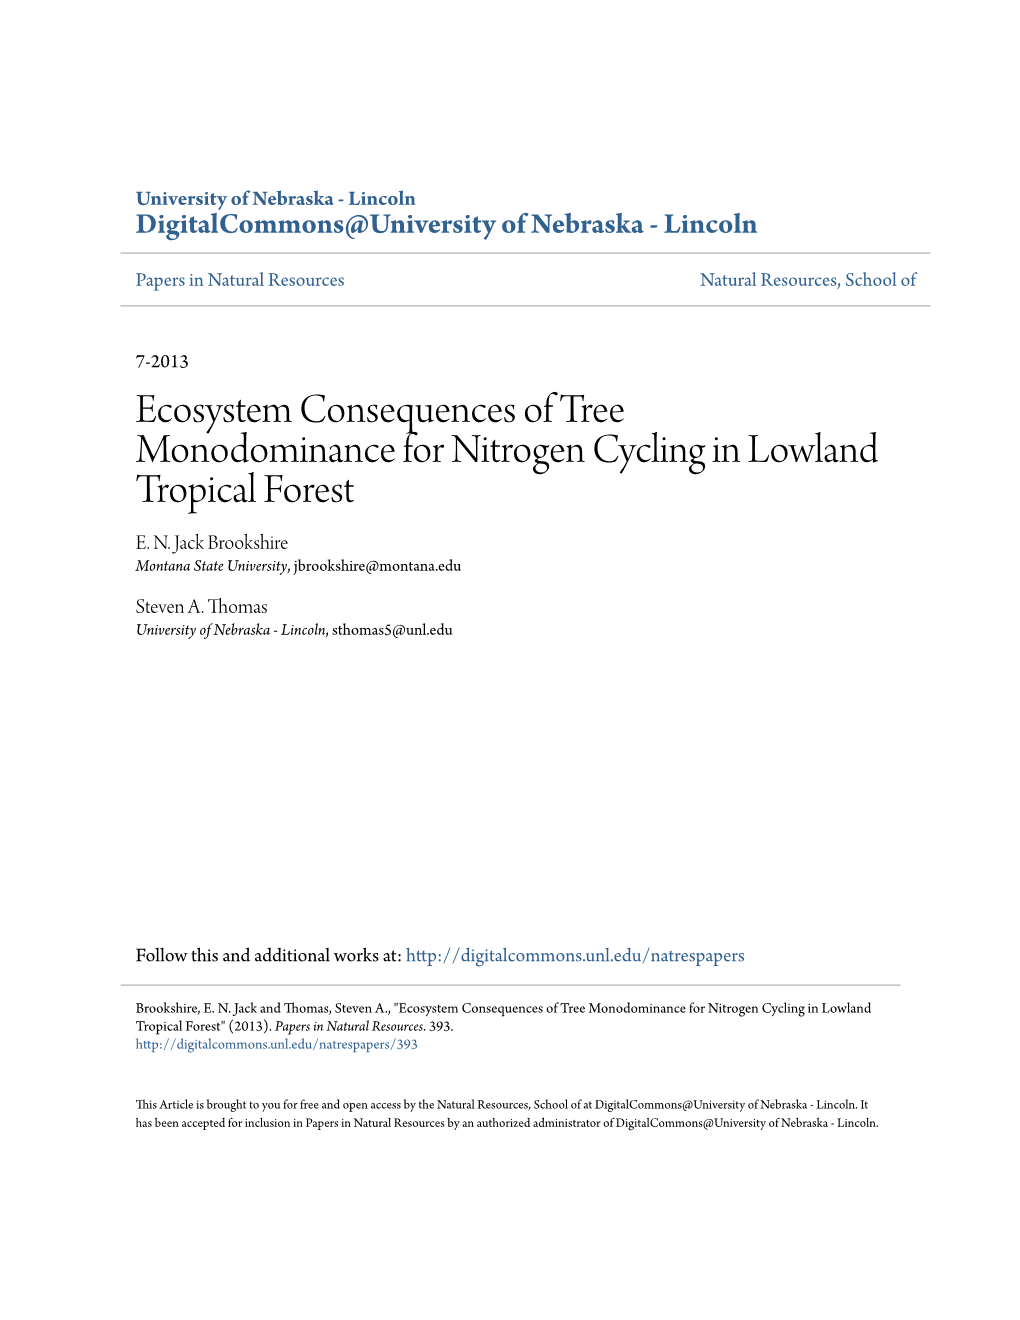 Ecosystem Consequences of Tree Monodominance for Nitrogen Cycling in Lowland Tropical Forest E